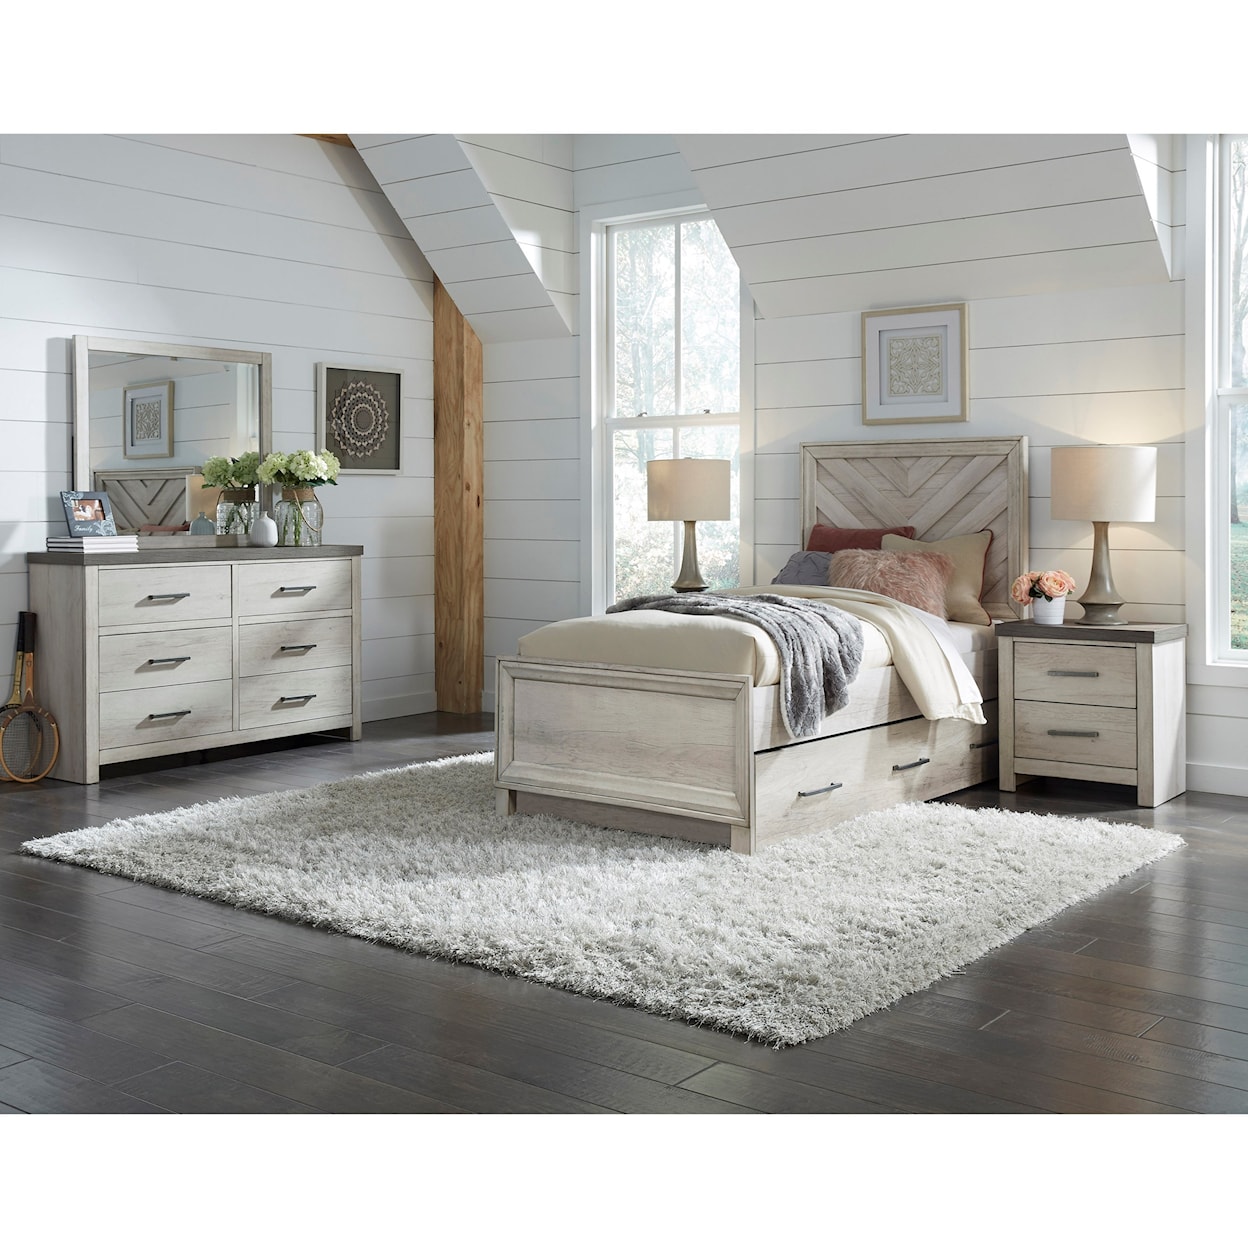 Samuel Lawrence Riverwood Twin Bed Room Group